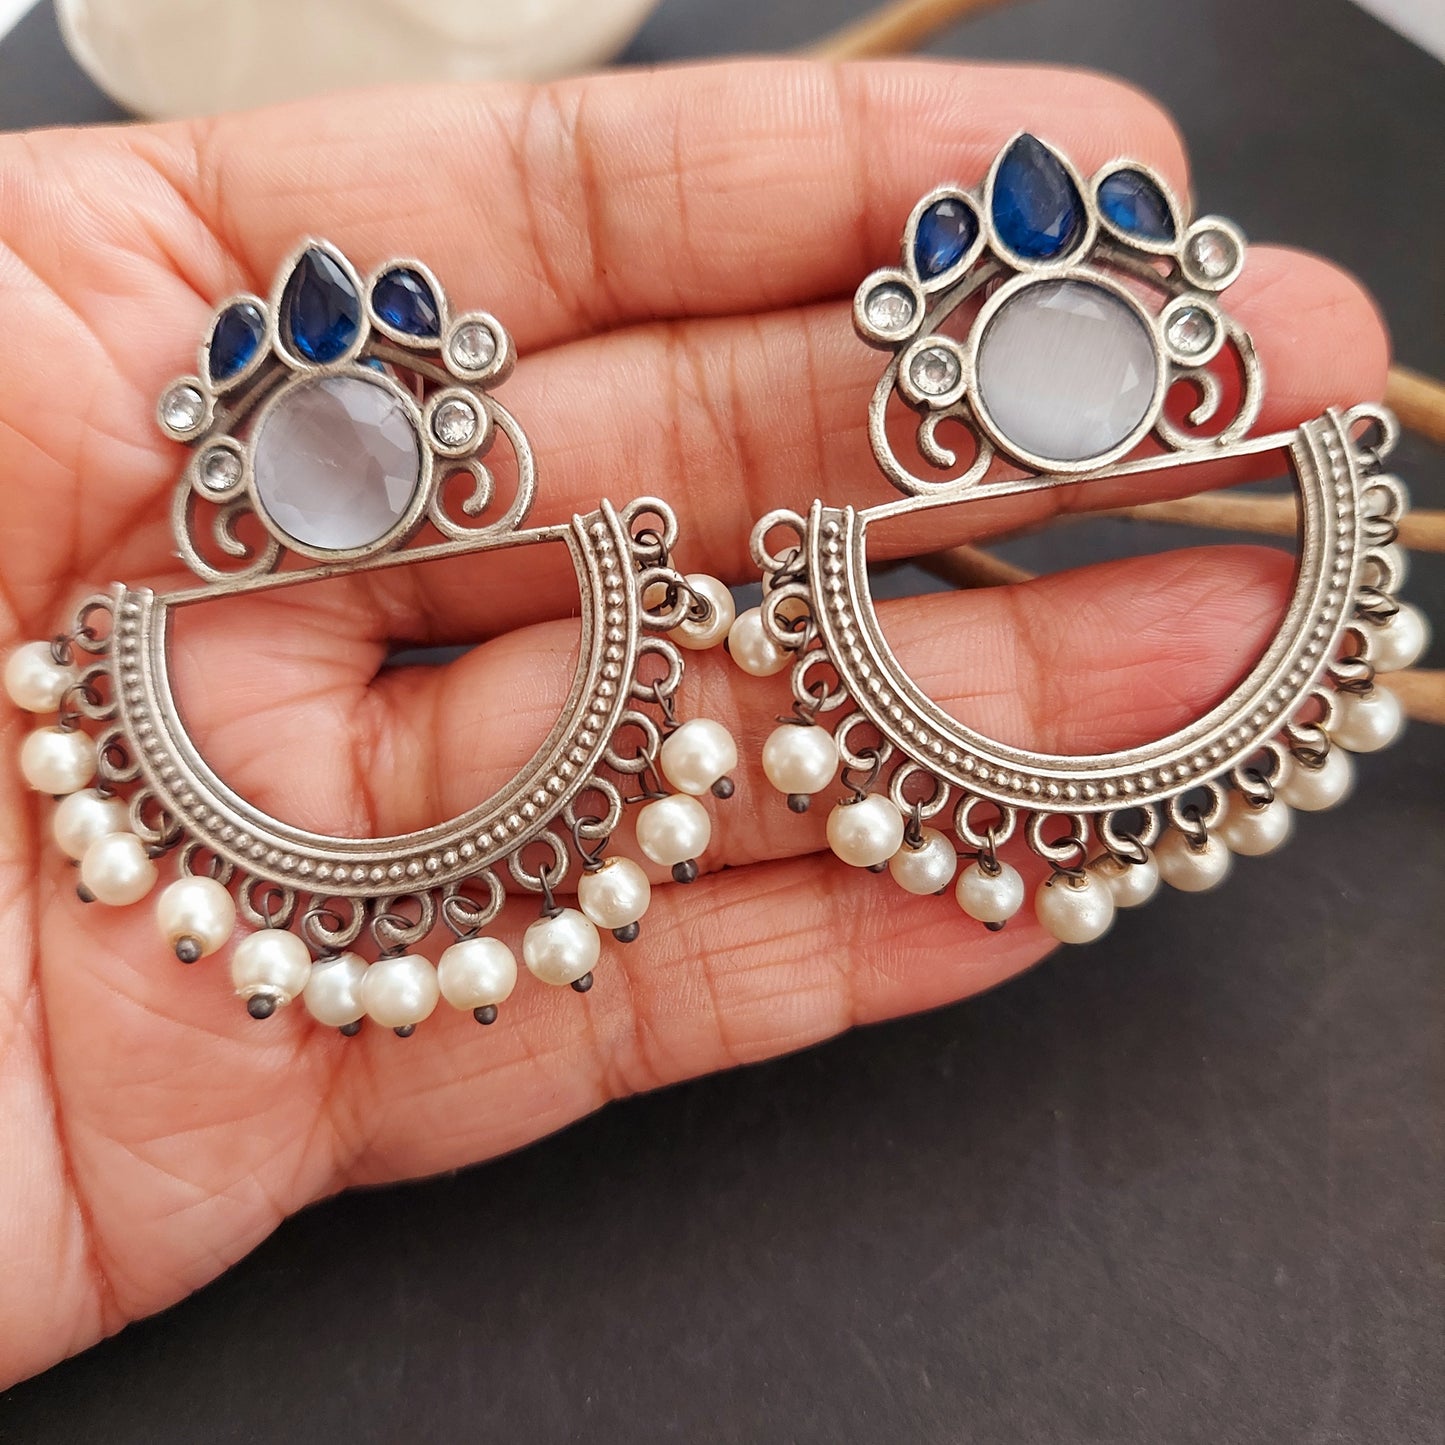 White and Blue Stoned Statement Earrings with Pearl  Danglers